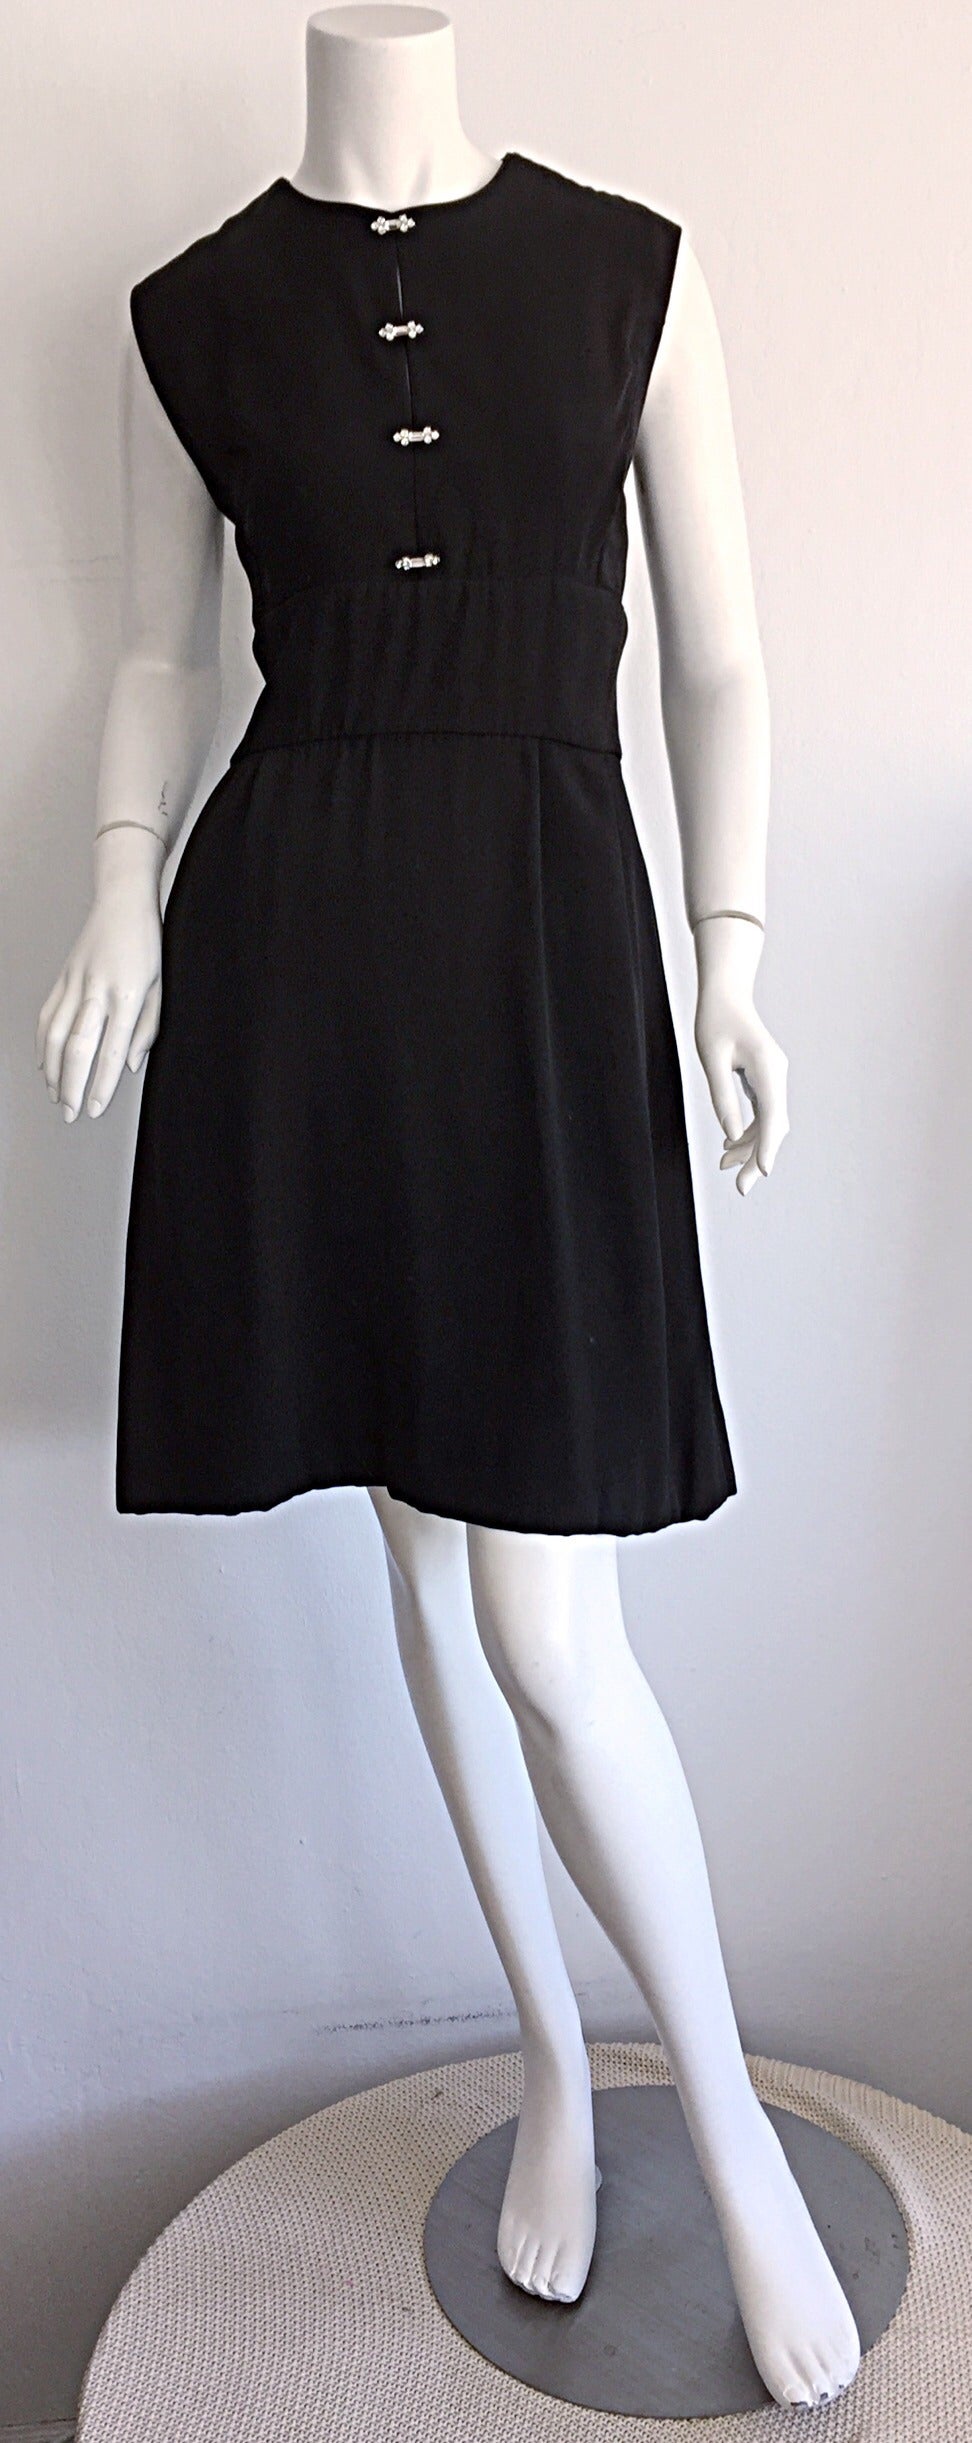 Beautiful 1960s Ceil Chapman dress, with rectangular rhinestones! Key-holes in between each set of rhinestones. Full A-Line skirt, with the intricate seams Chapman was famous for! An extremely flattering dress! This is the PERFECT little black